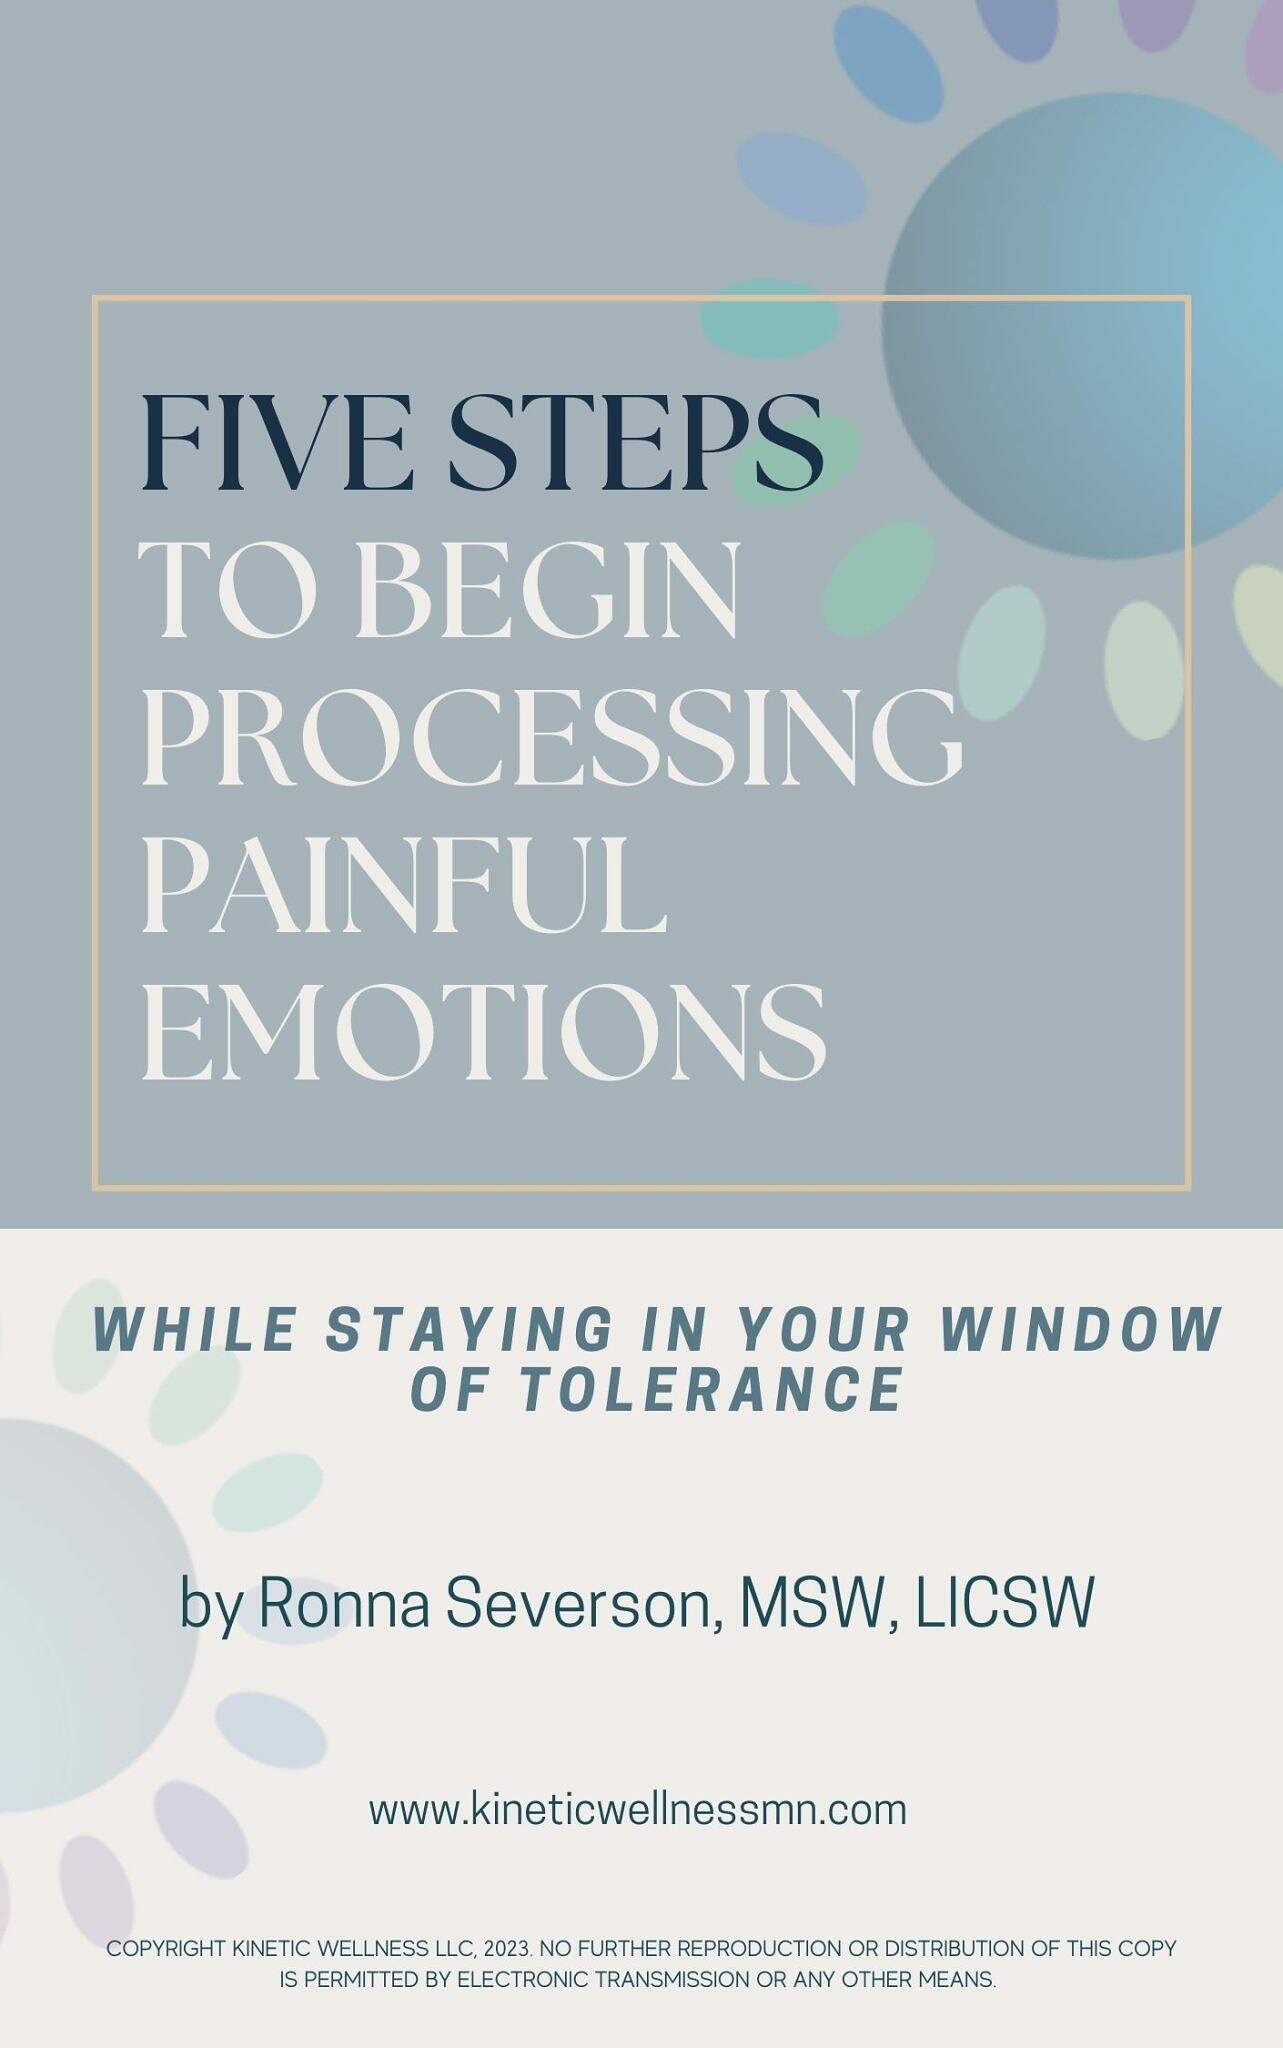 FIVE STEPS TO BEGIN PROCESSING PAINFUL EMOTIONS